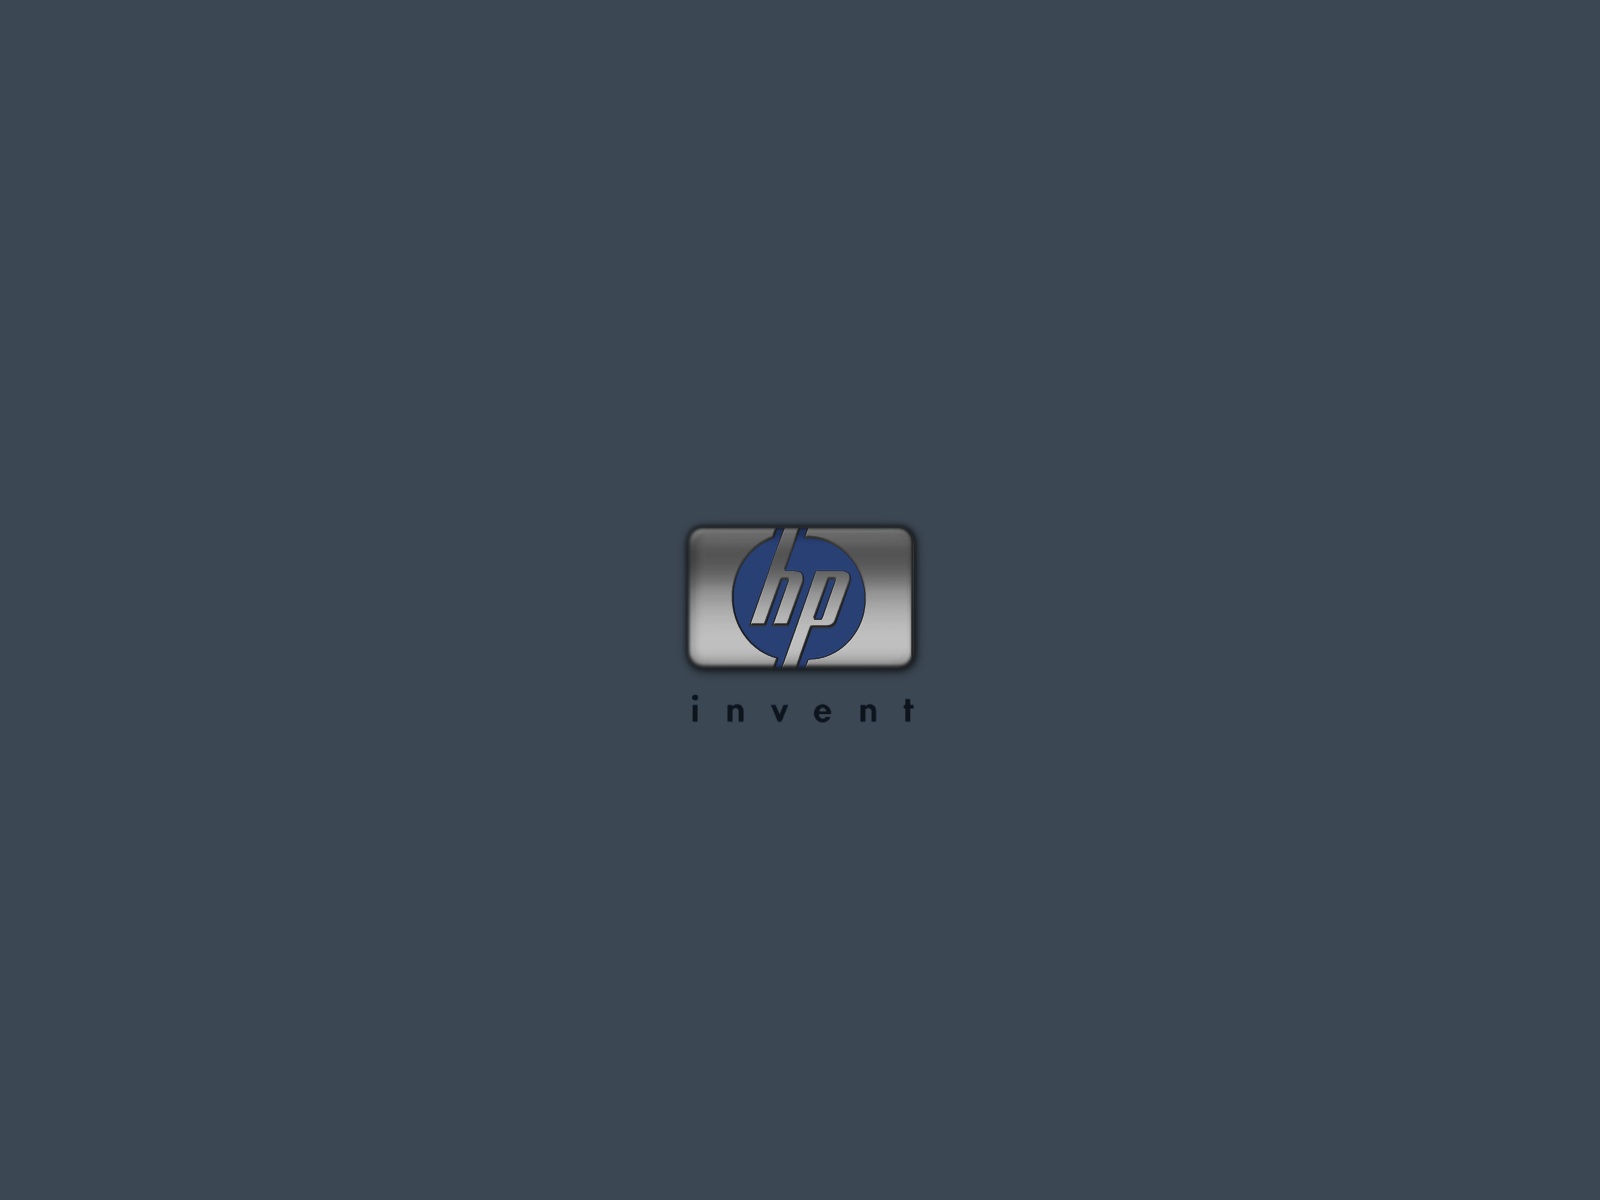 Hp Invent , HD Wallpaper & Backgrounds